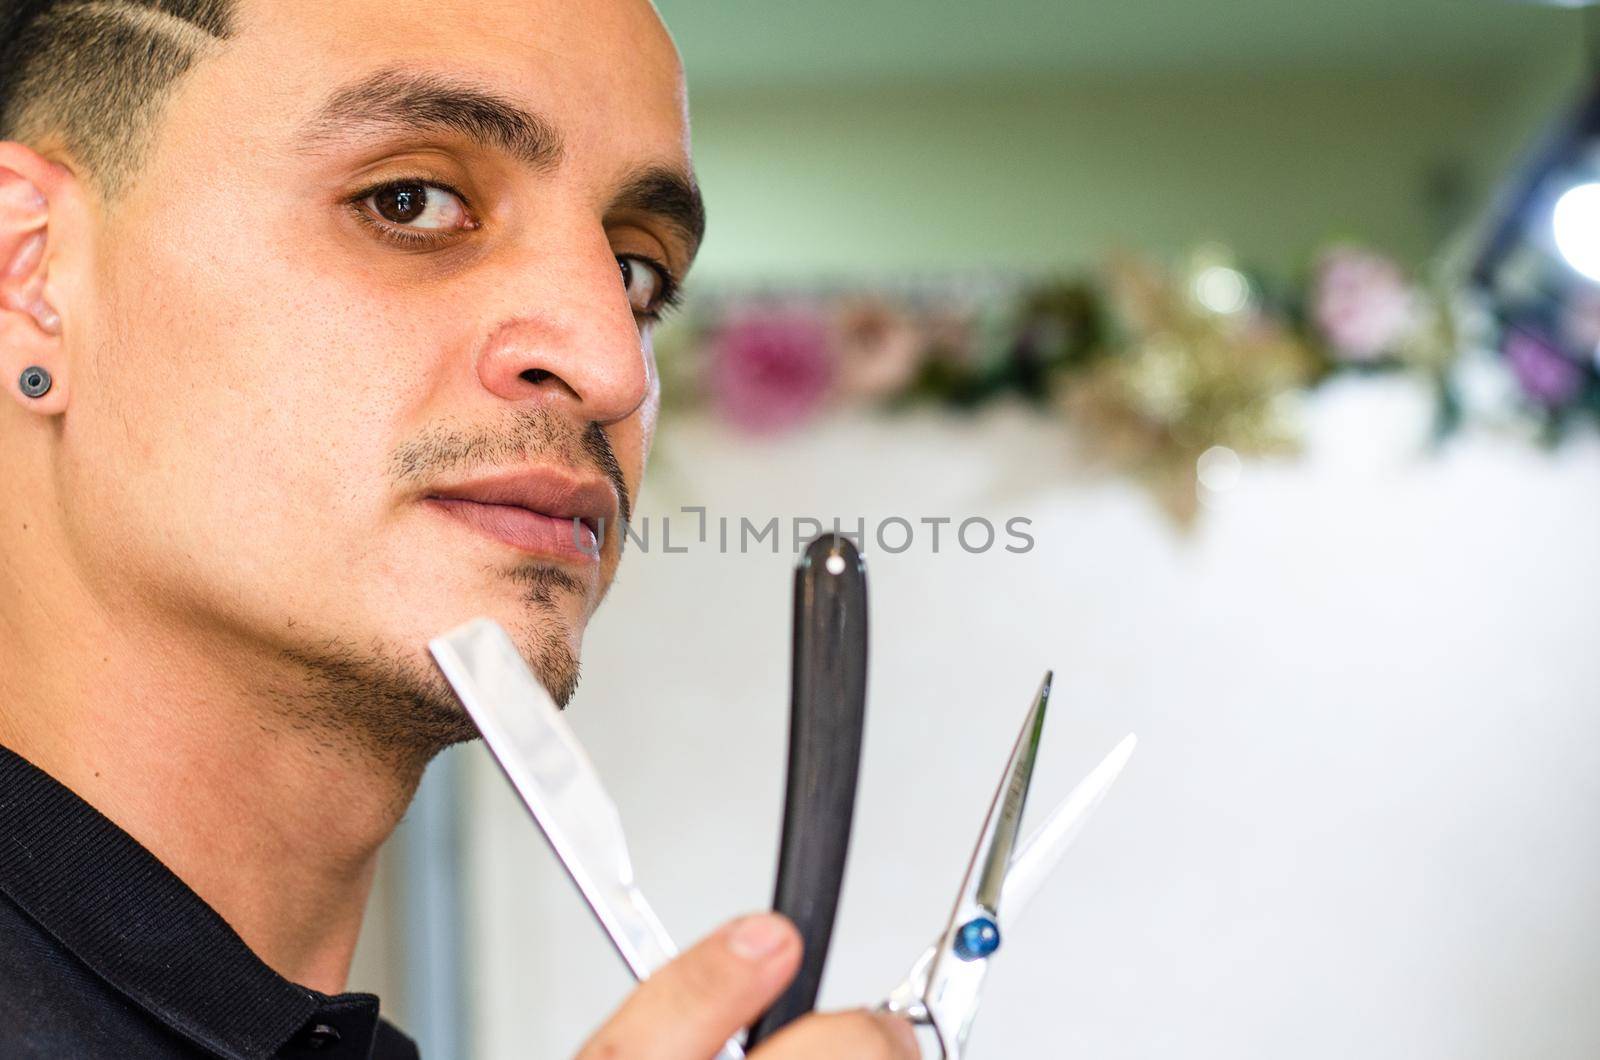 Barber Shop. Barber holds a razor to shave his beard. by Peruphotoart